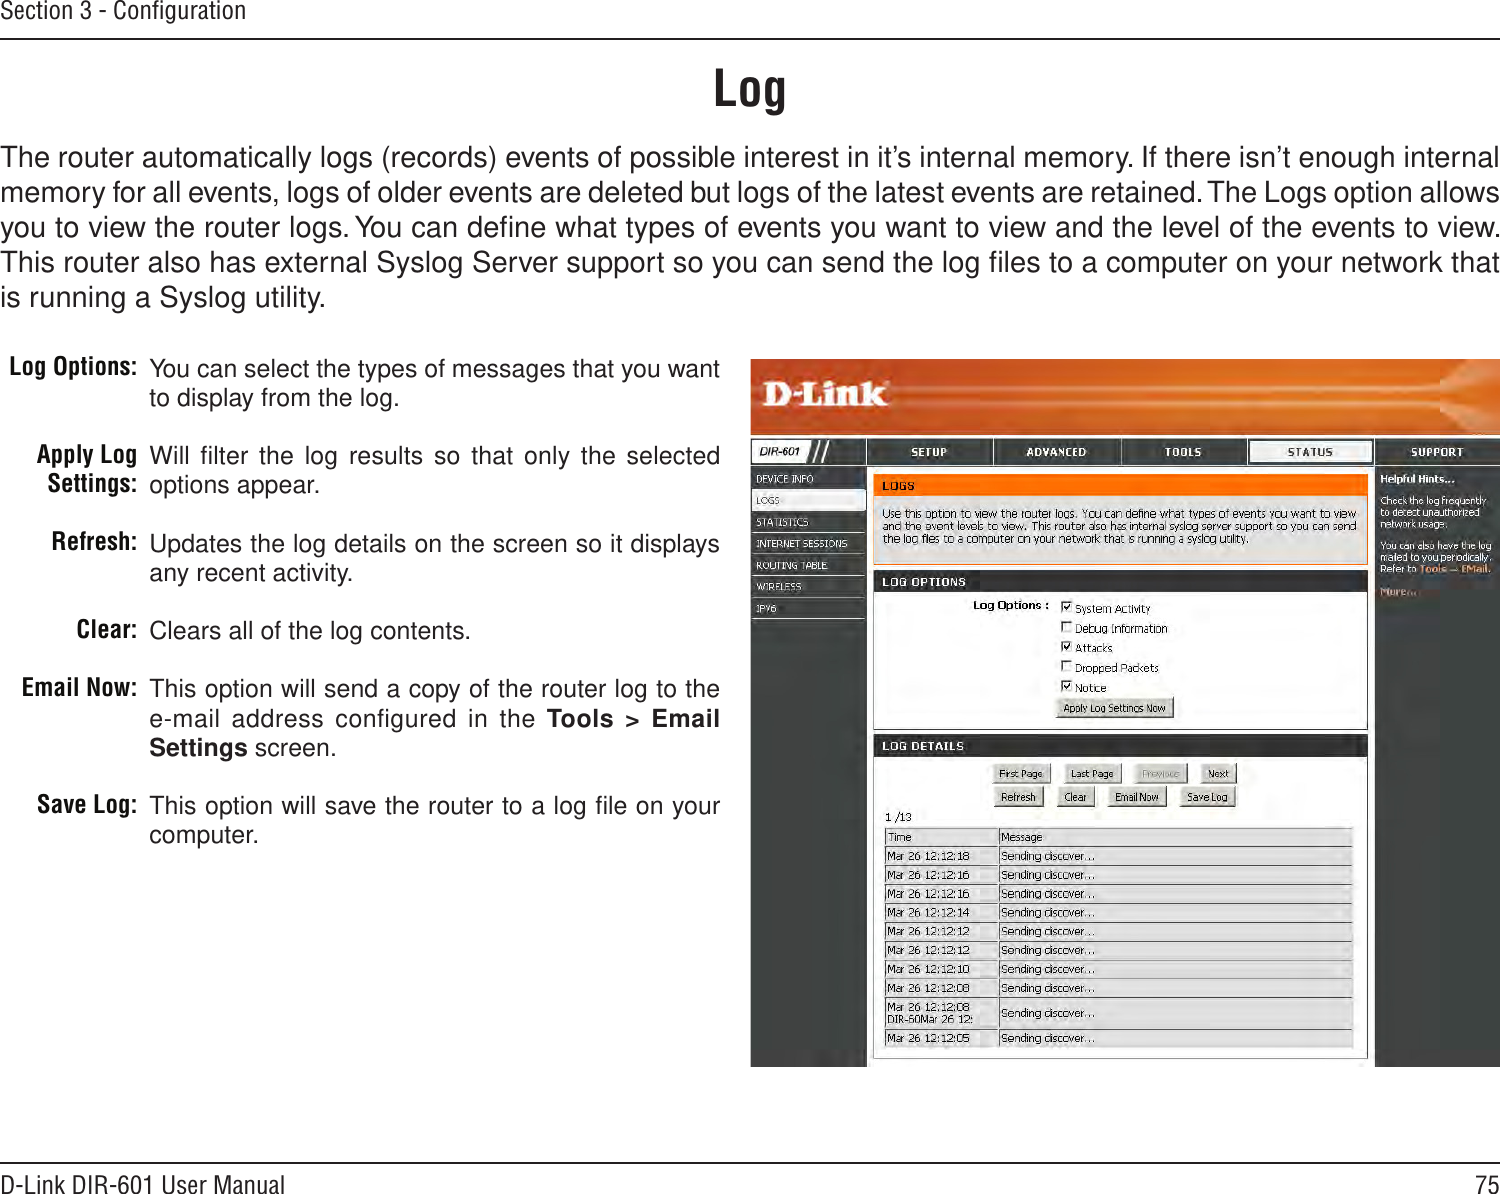 75D-Link DIR-601 User ManualSection 3 - ConﬁgurationLogLog Options:Apply Log Settings:Refresh:Clear:Email Now:Save Log:You can select the types of messages that you want to display from the log. Will ﬁlter the log results  so that only the  selected options appear.Updates the log details on the screen so it displays any recent activity.Clears all of the log contents.This option will send a copy of the router log to the e-mail address conﬁgured in the Tools &gt; Email Settings screen.This option will save the router to a log ﬁle on your computer.The router automatically logs (records) events of possible interest in it’s internal memory. If there isn’t enough internal memory for all events, logs of older events are deleted but logs of the latest events are retained. The Logs option allows you to view the router logs. You can deﬁne what types of events you want to view and the level of the events to view. This router also has external Syslog Server support so you can send the log ﬁles to a computer on your network that is running a Syslog utility.